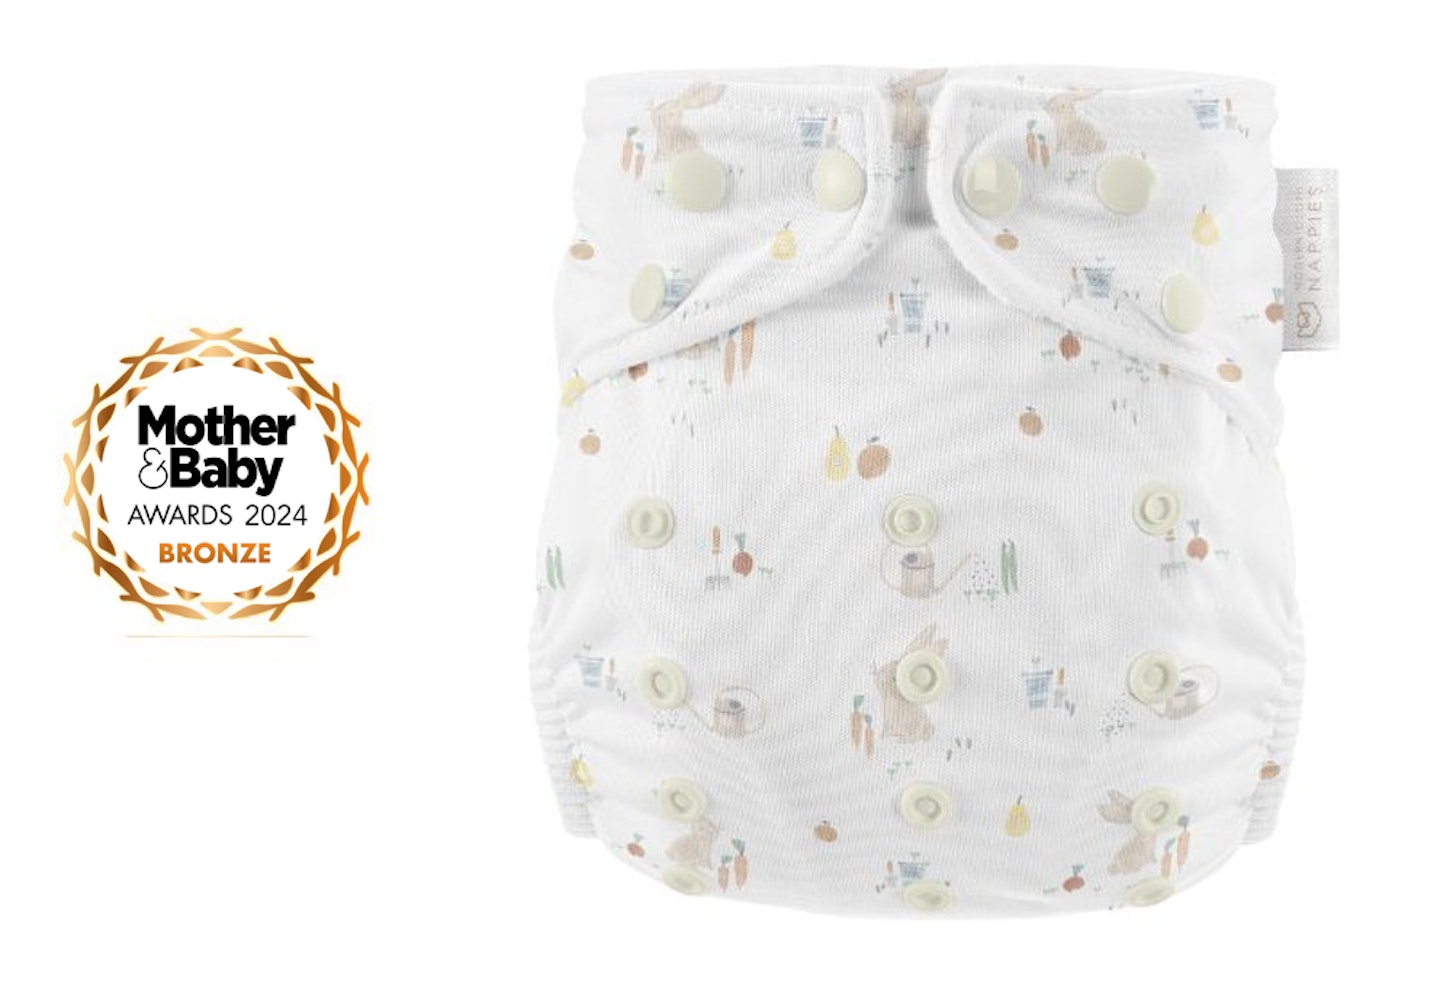 Modern Cloth Nappies Pearl Pocket one size all-in-one reusable nappy Bronze Award 2024